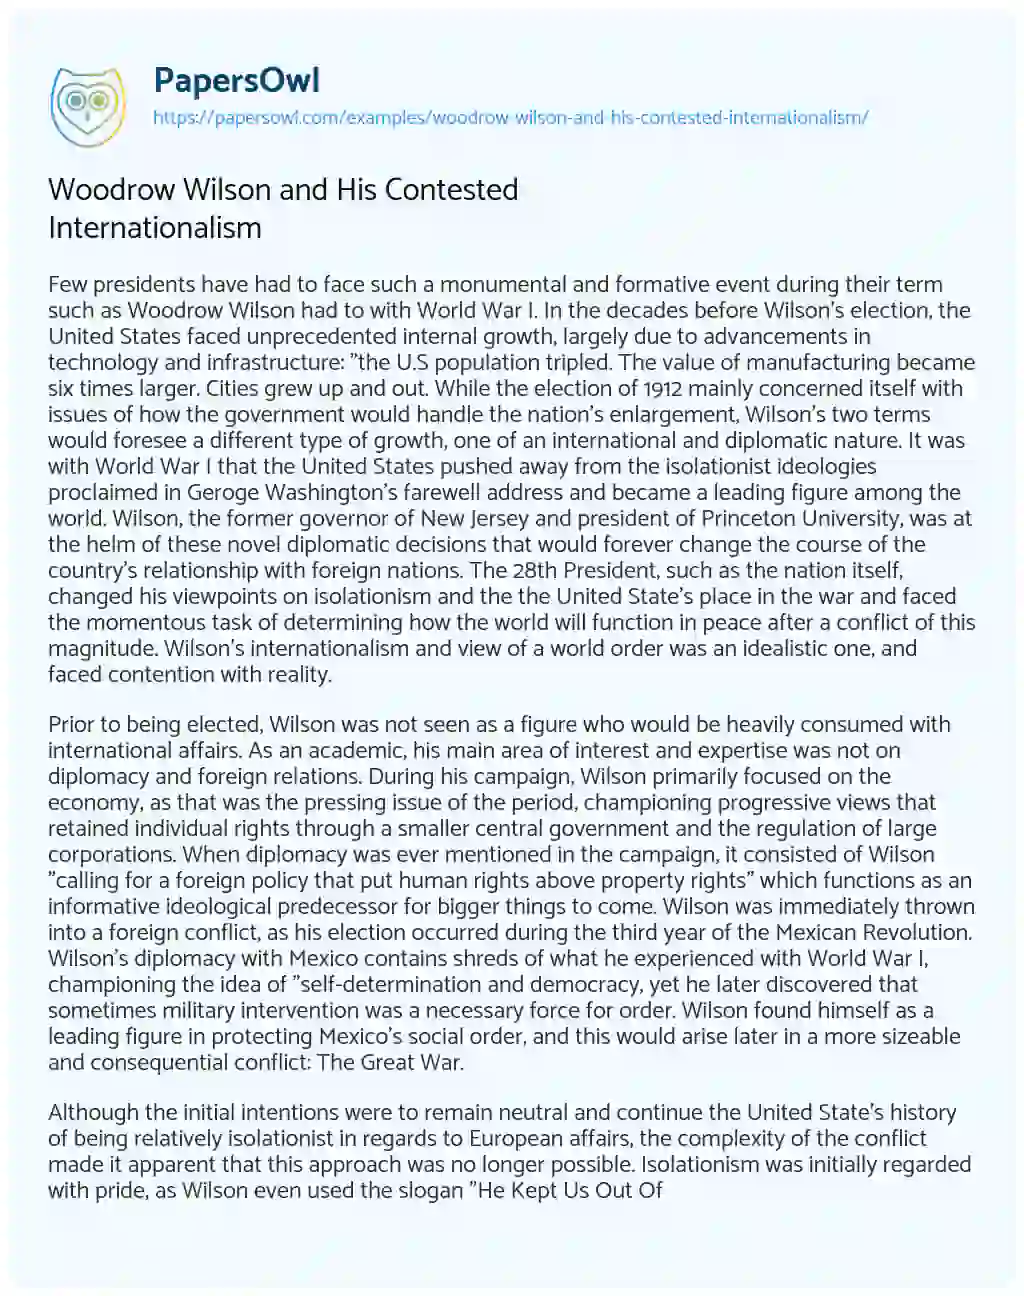 Woodrow Wilson and his Contested Internationalism essay